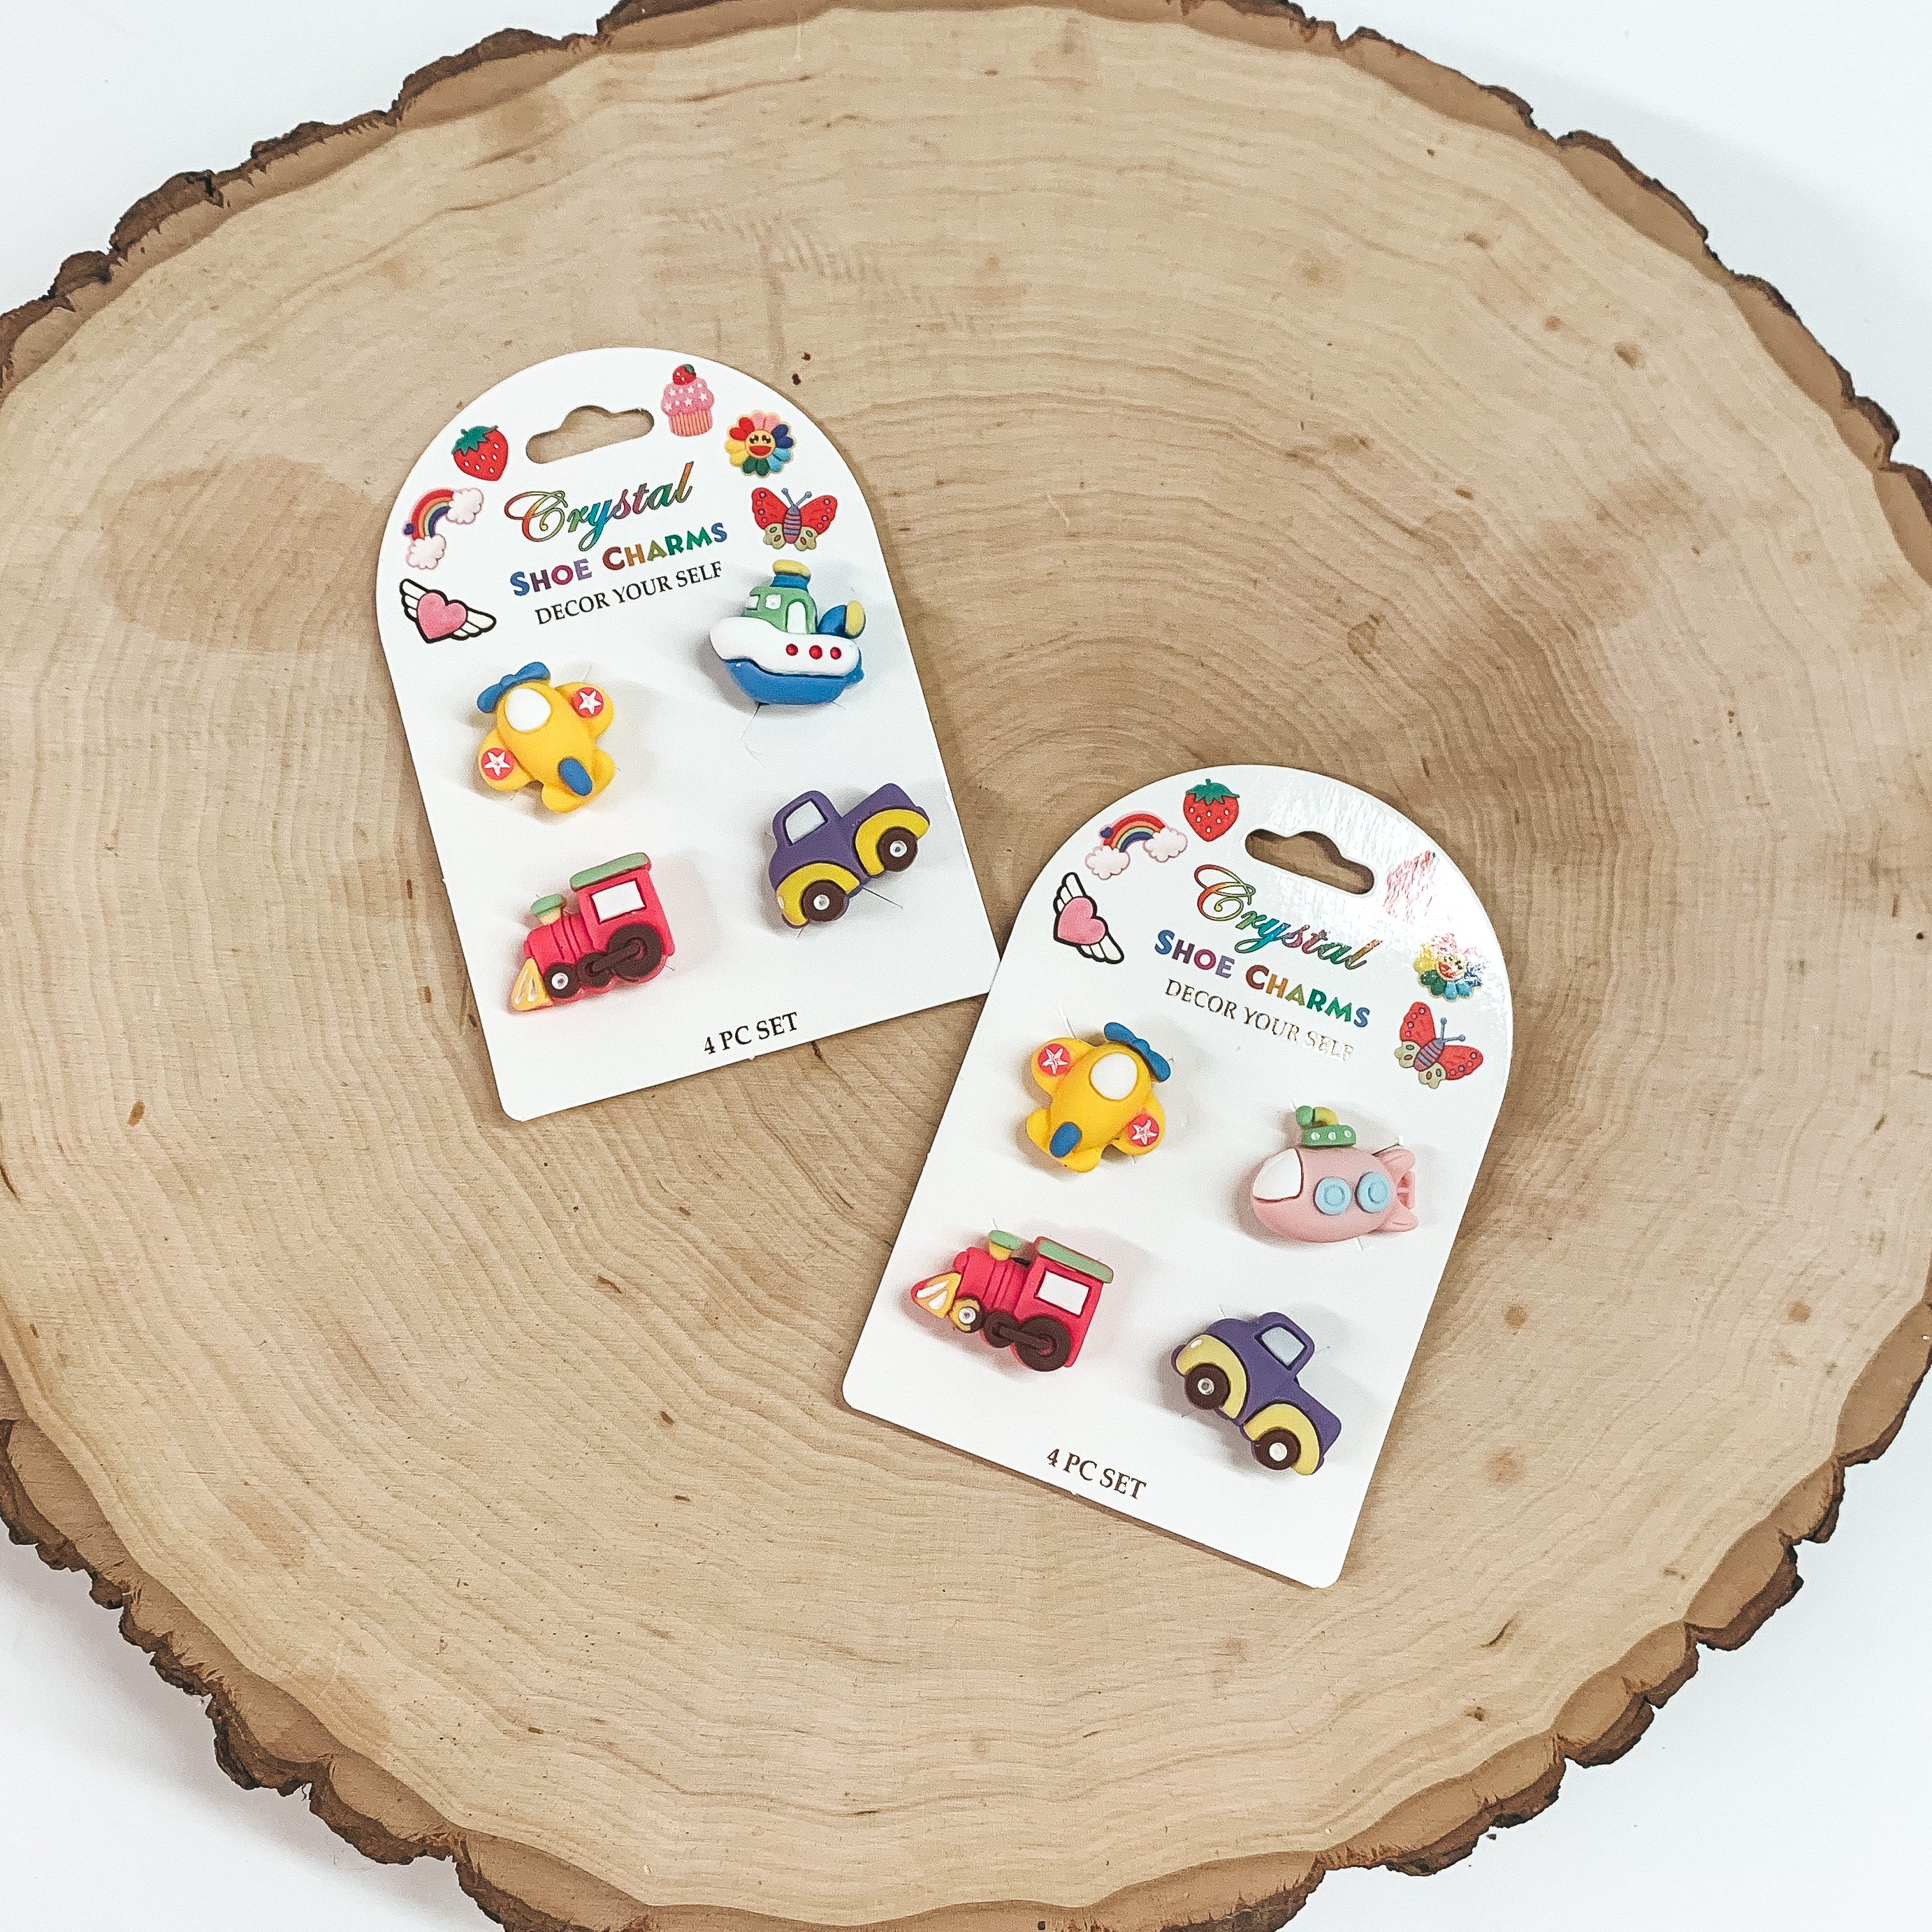 There are two packs of four small shoe charms. The left one as a boat, truck, train, and plane. The right pack has a truc, plane, train, and submarine. These shoe charms are placed on a white card and taken laying on a slab of wood and on white background.